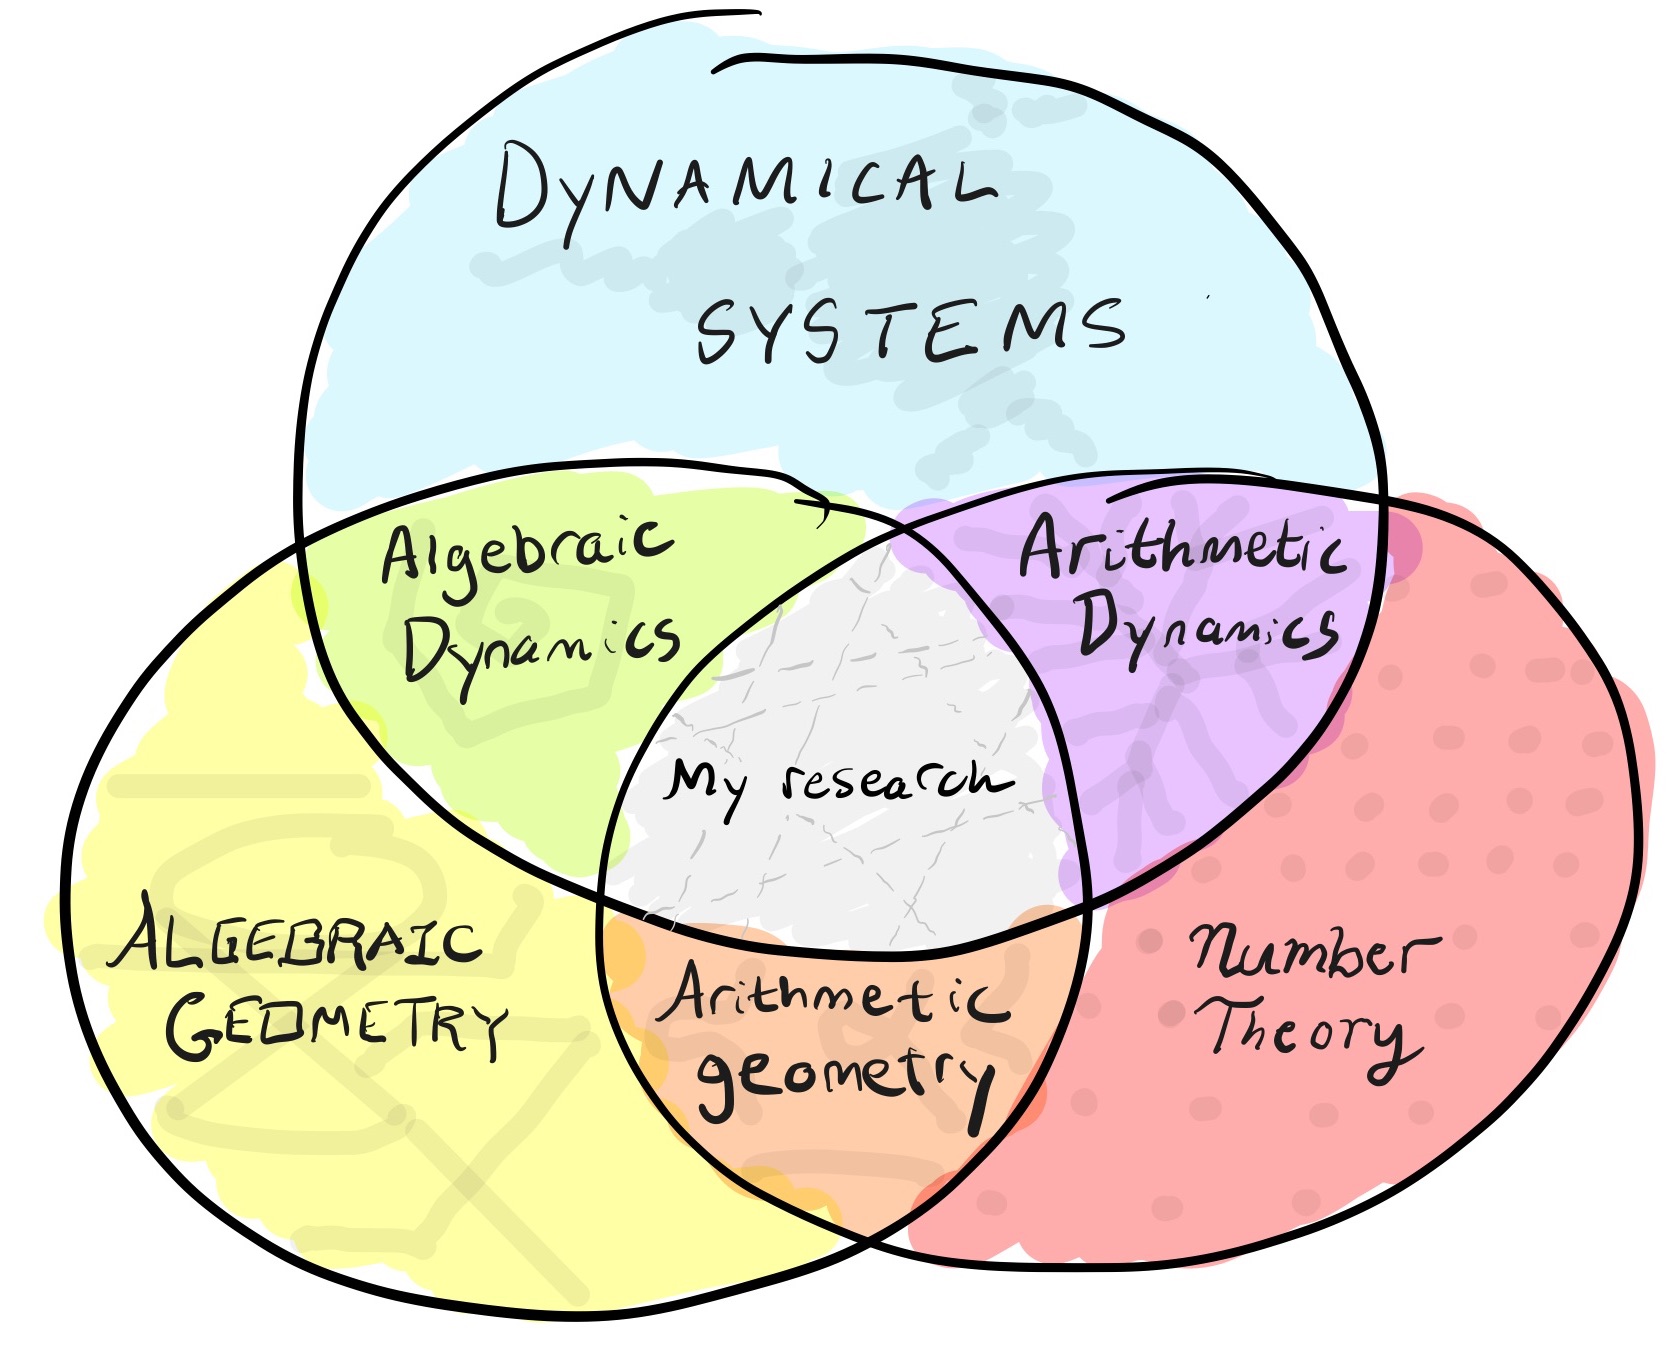 The image shows a three-circle Venn diagram. The intersection of Algebraic Geometry and Dynamical Systems is Algebraic Dynamics.
             The intersection of Algebraic Geometry and Number Theory is Arithmetic Geometry. The intersection of Number Theory and Dynamical Systems is Arithmetic Dynamics.
             My research is in the triple intersection.